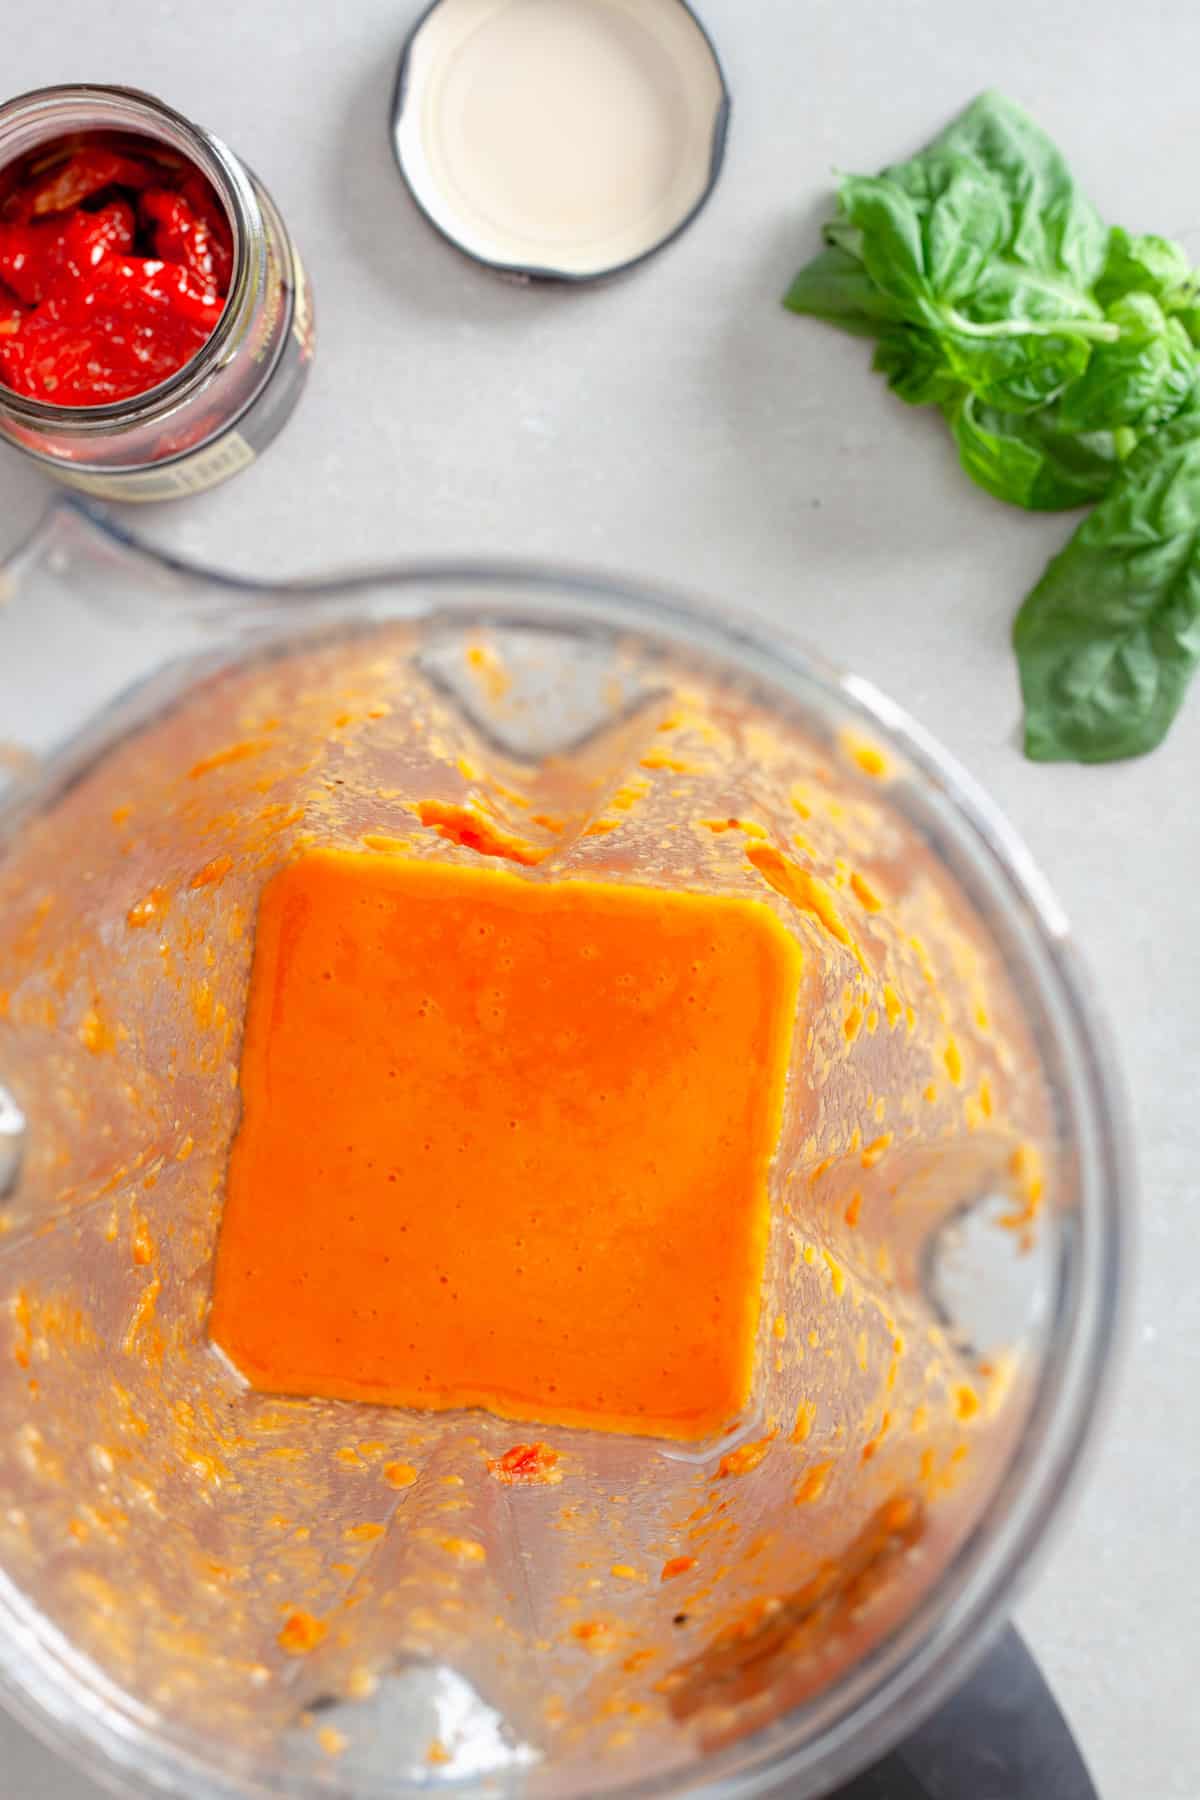 A blender with sun-dried vinaigrette just blended to a smooth consistency.